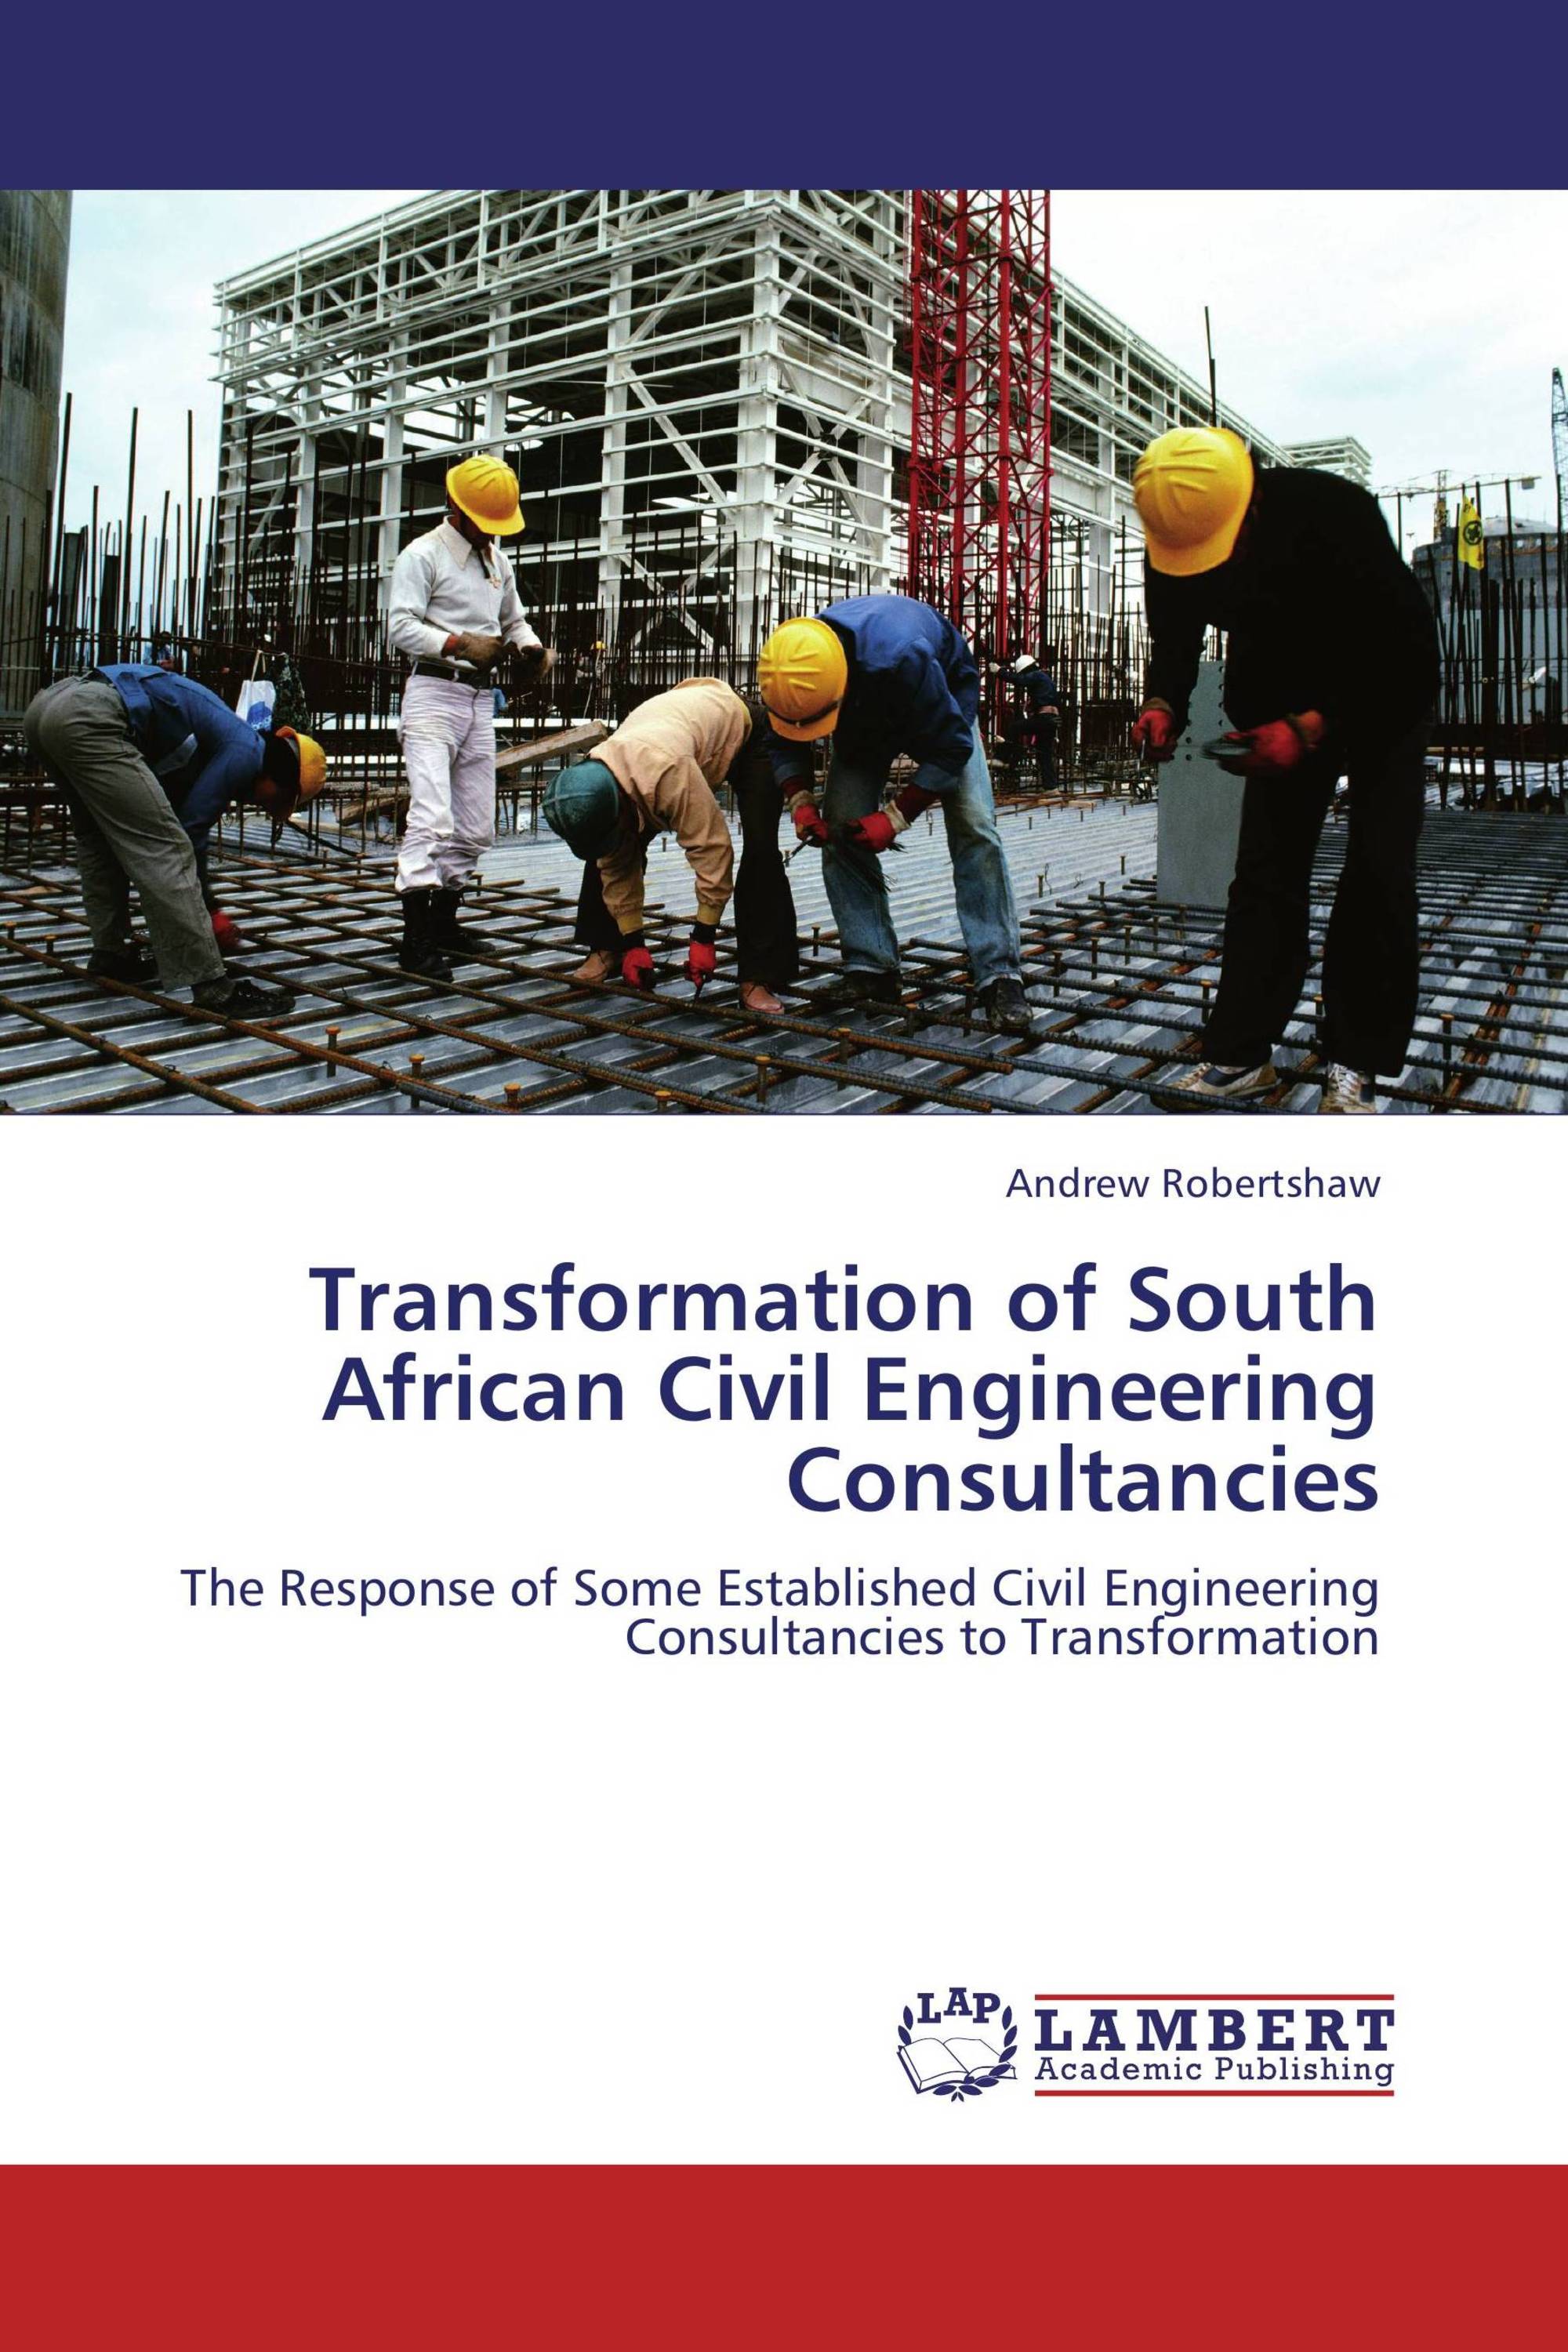 Jobs For Civil Engineering Students In South Africa